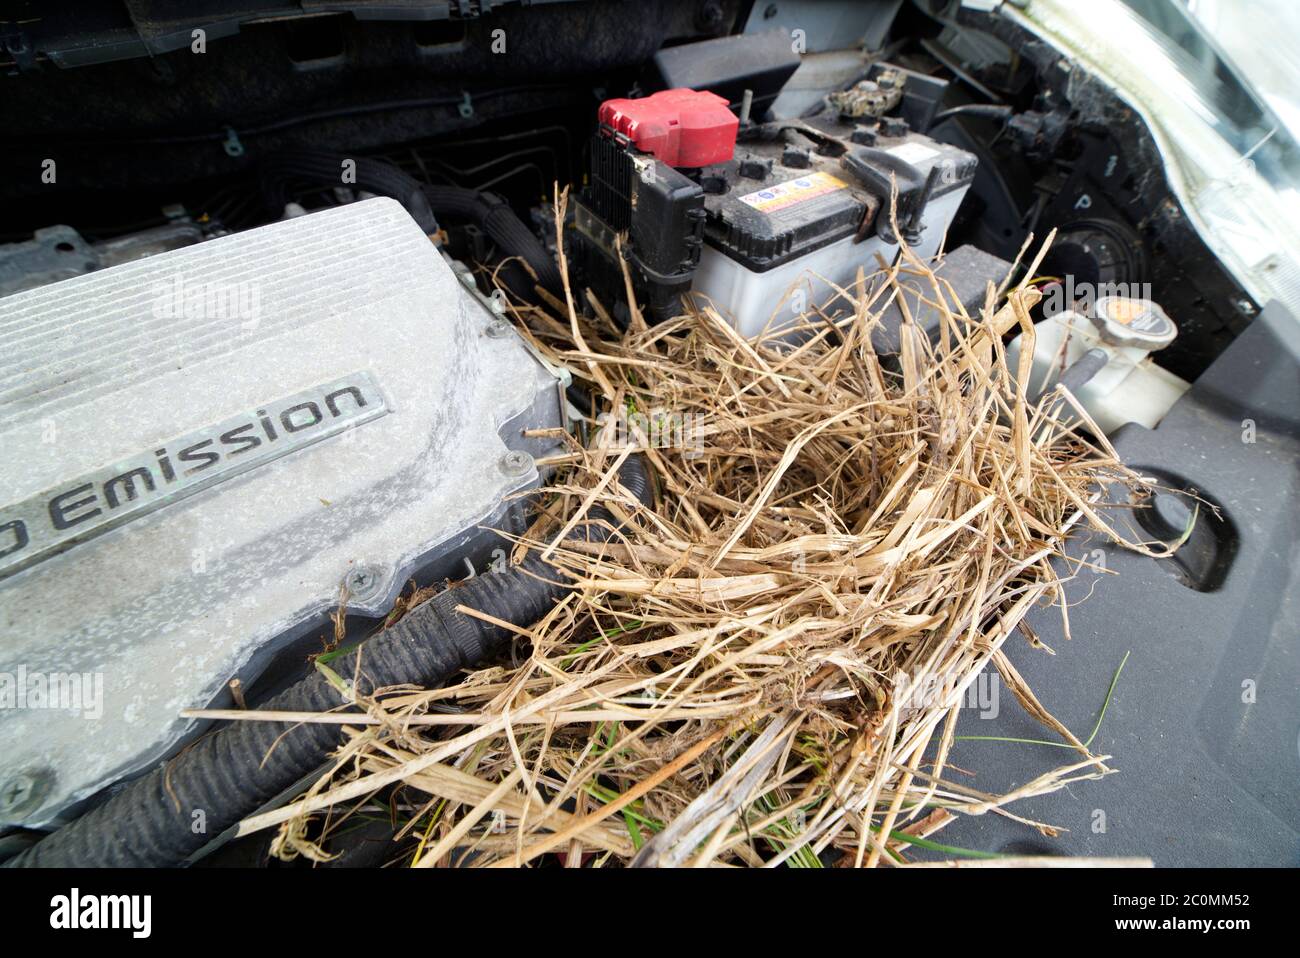 Starling nest in electric car Stock Photo